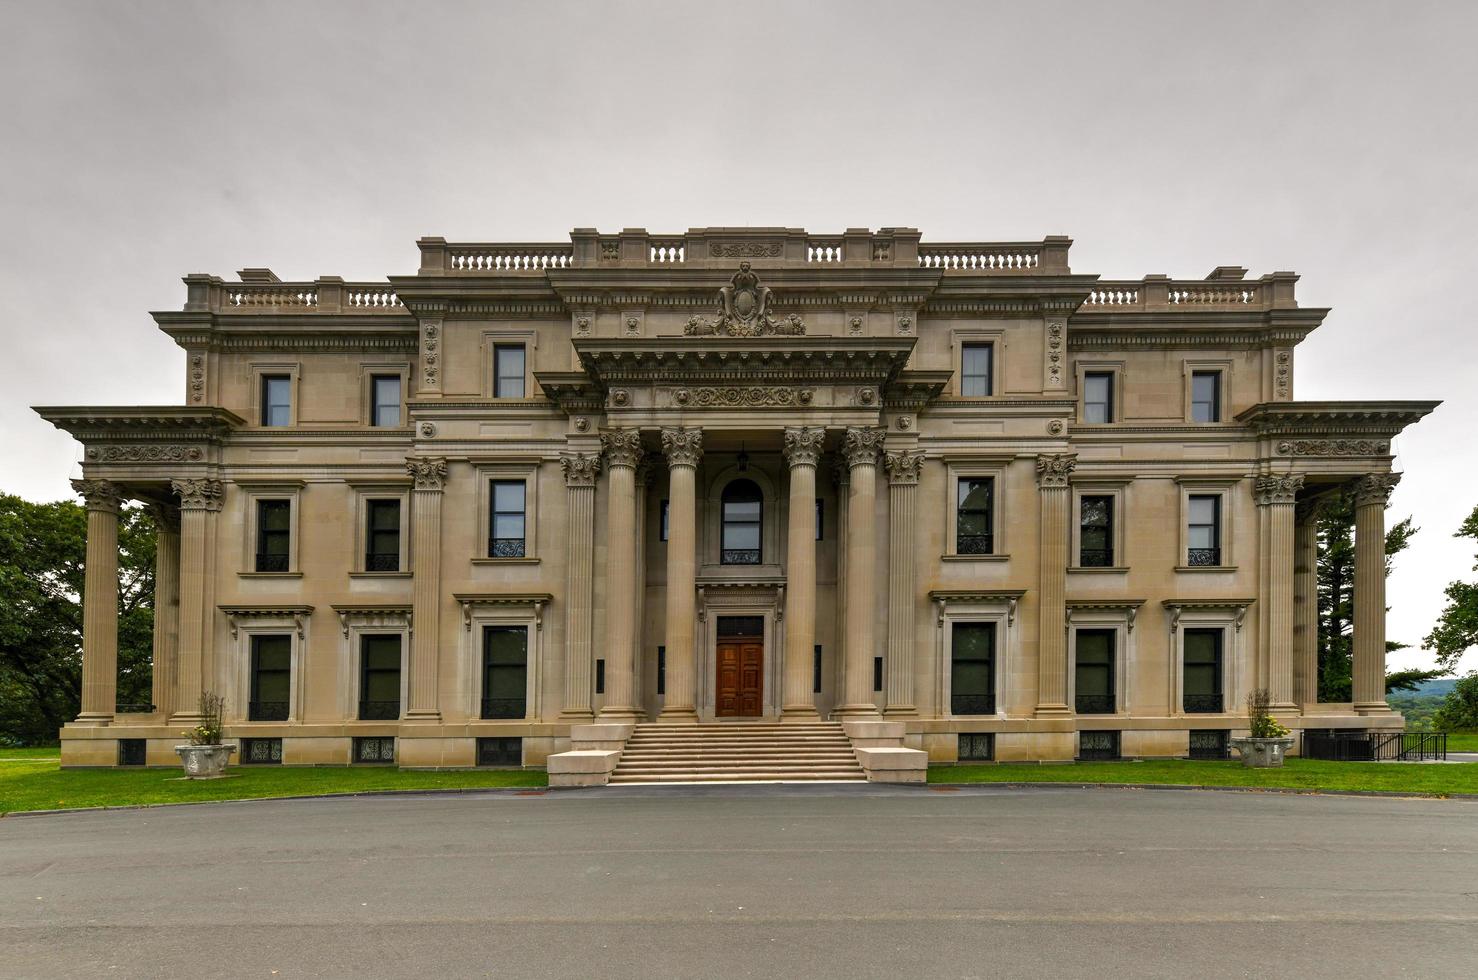 New York - Aug 31, 2019 -  Vanderbilt Mansion in Hyde Park, New York. Historically known as Hyde Park, the Vanderbilt Mansion National Historic Site is one of the area's oldest Hudson River estates. photo